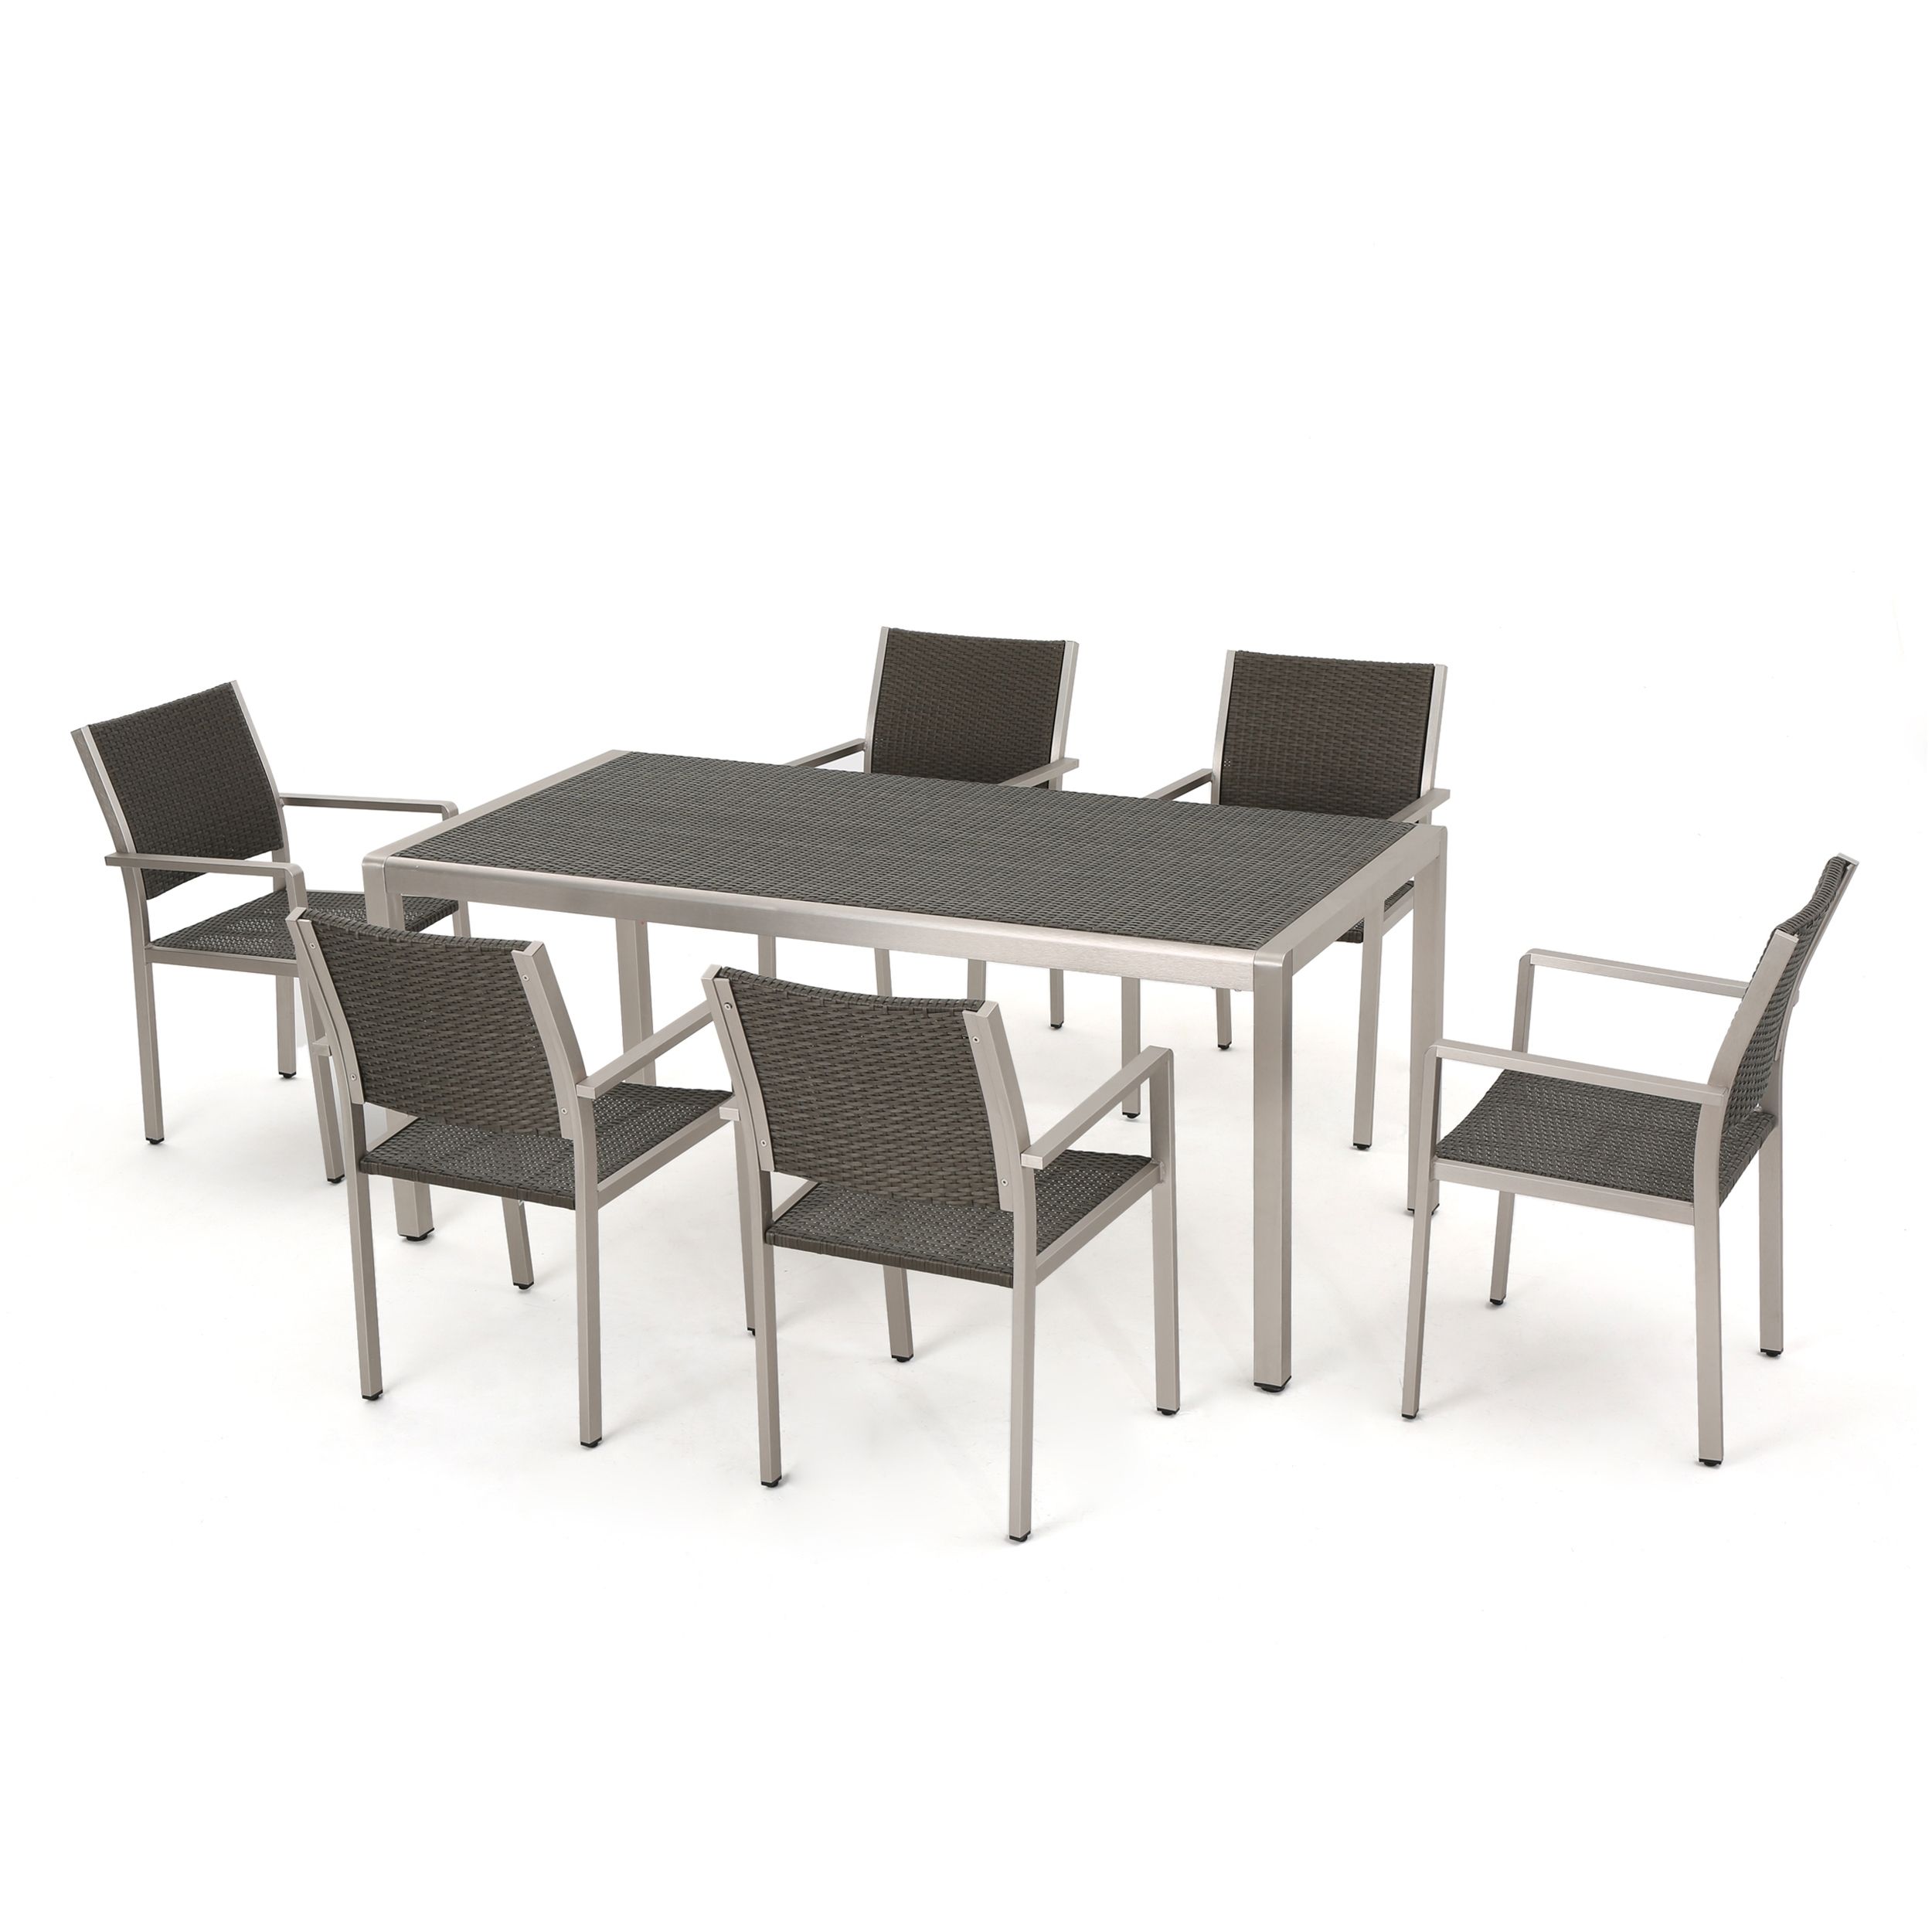 Coral Bay Outdoor 7 Piece Aluminum Dining Set With Wicker Top, Grey With Regard To Most Recently Released Cora 7 Piece Dining Sets (View 18 of 20)